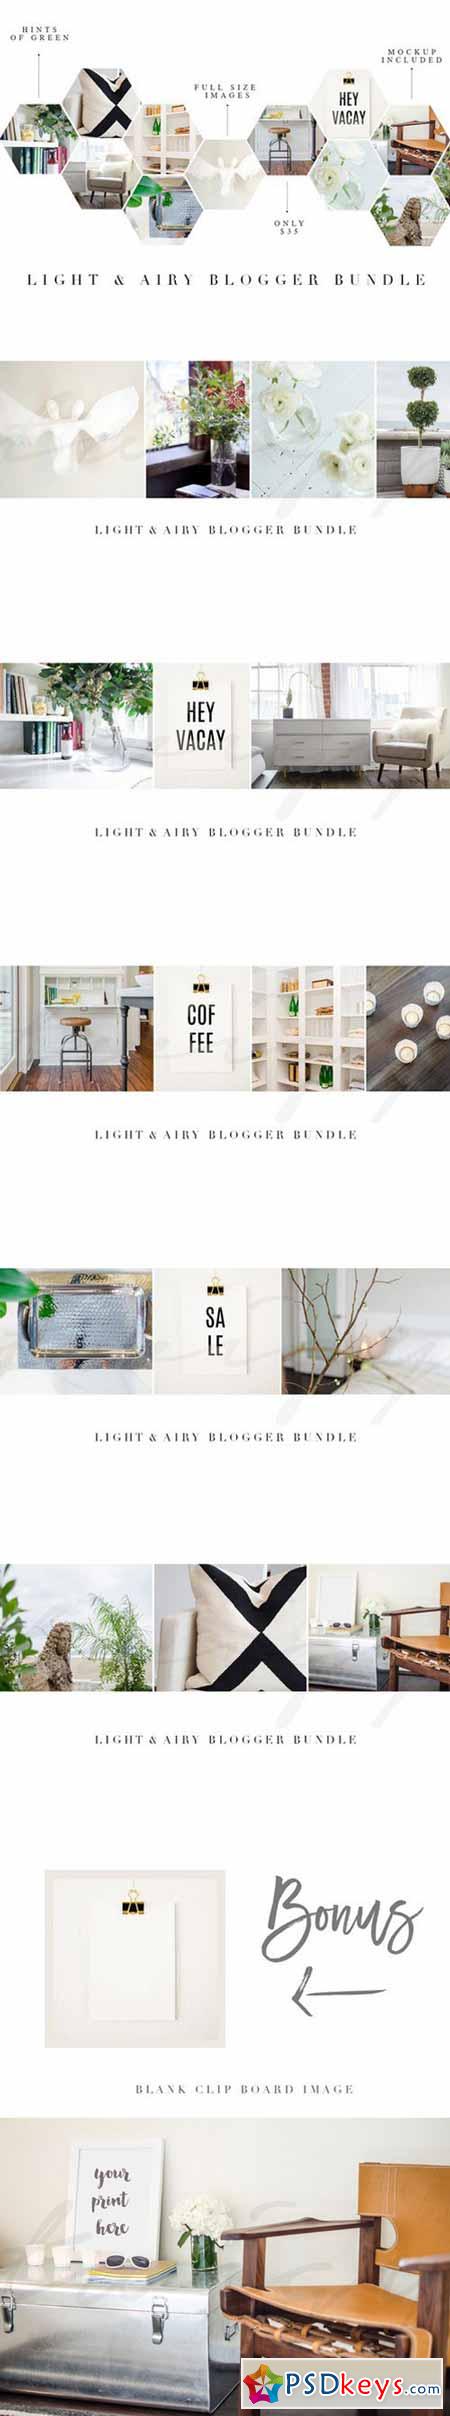 Styled Stock Images & Mockups 439908